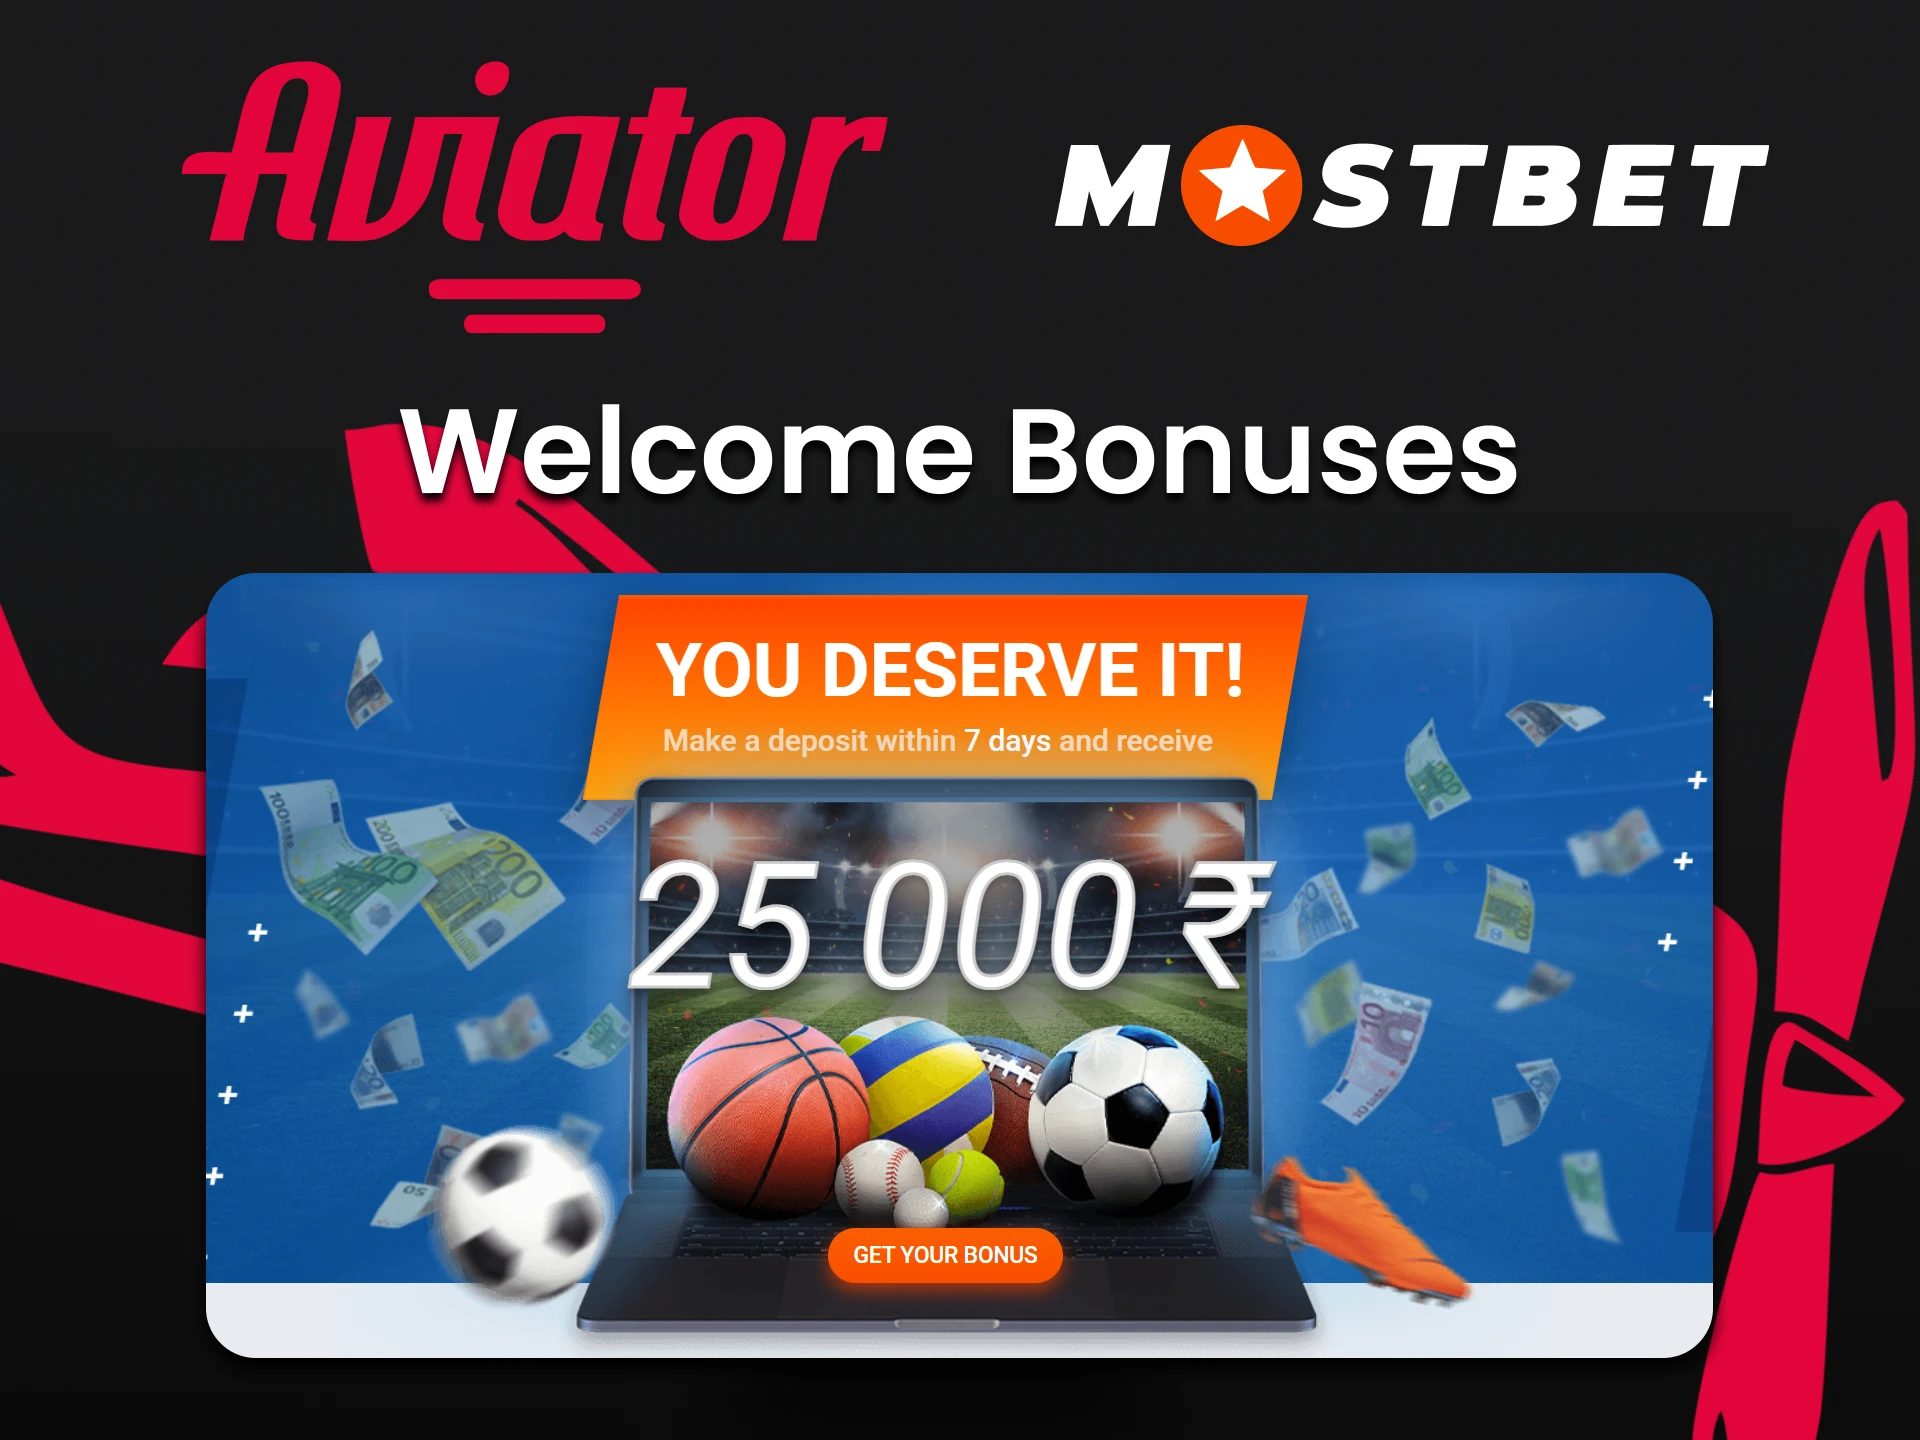 Play Aviator at Mostbet and get bonuses.